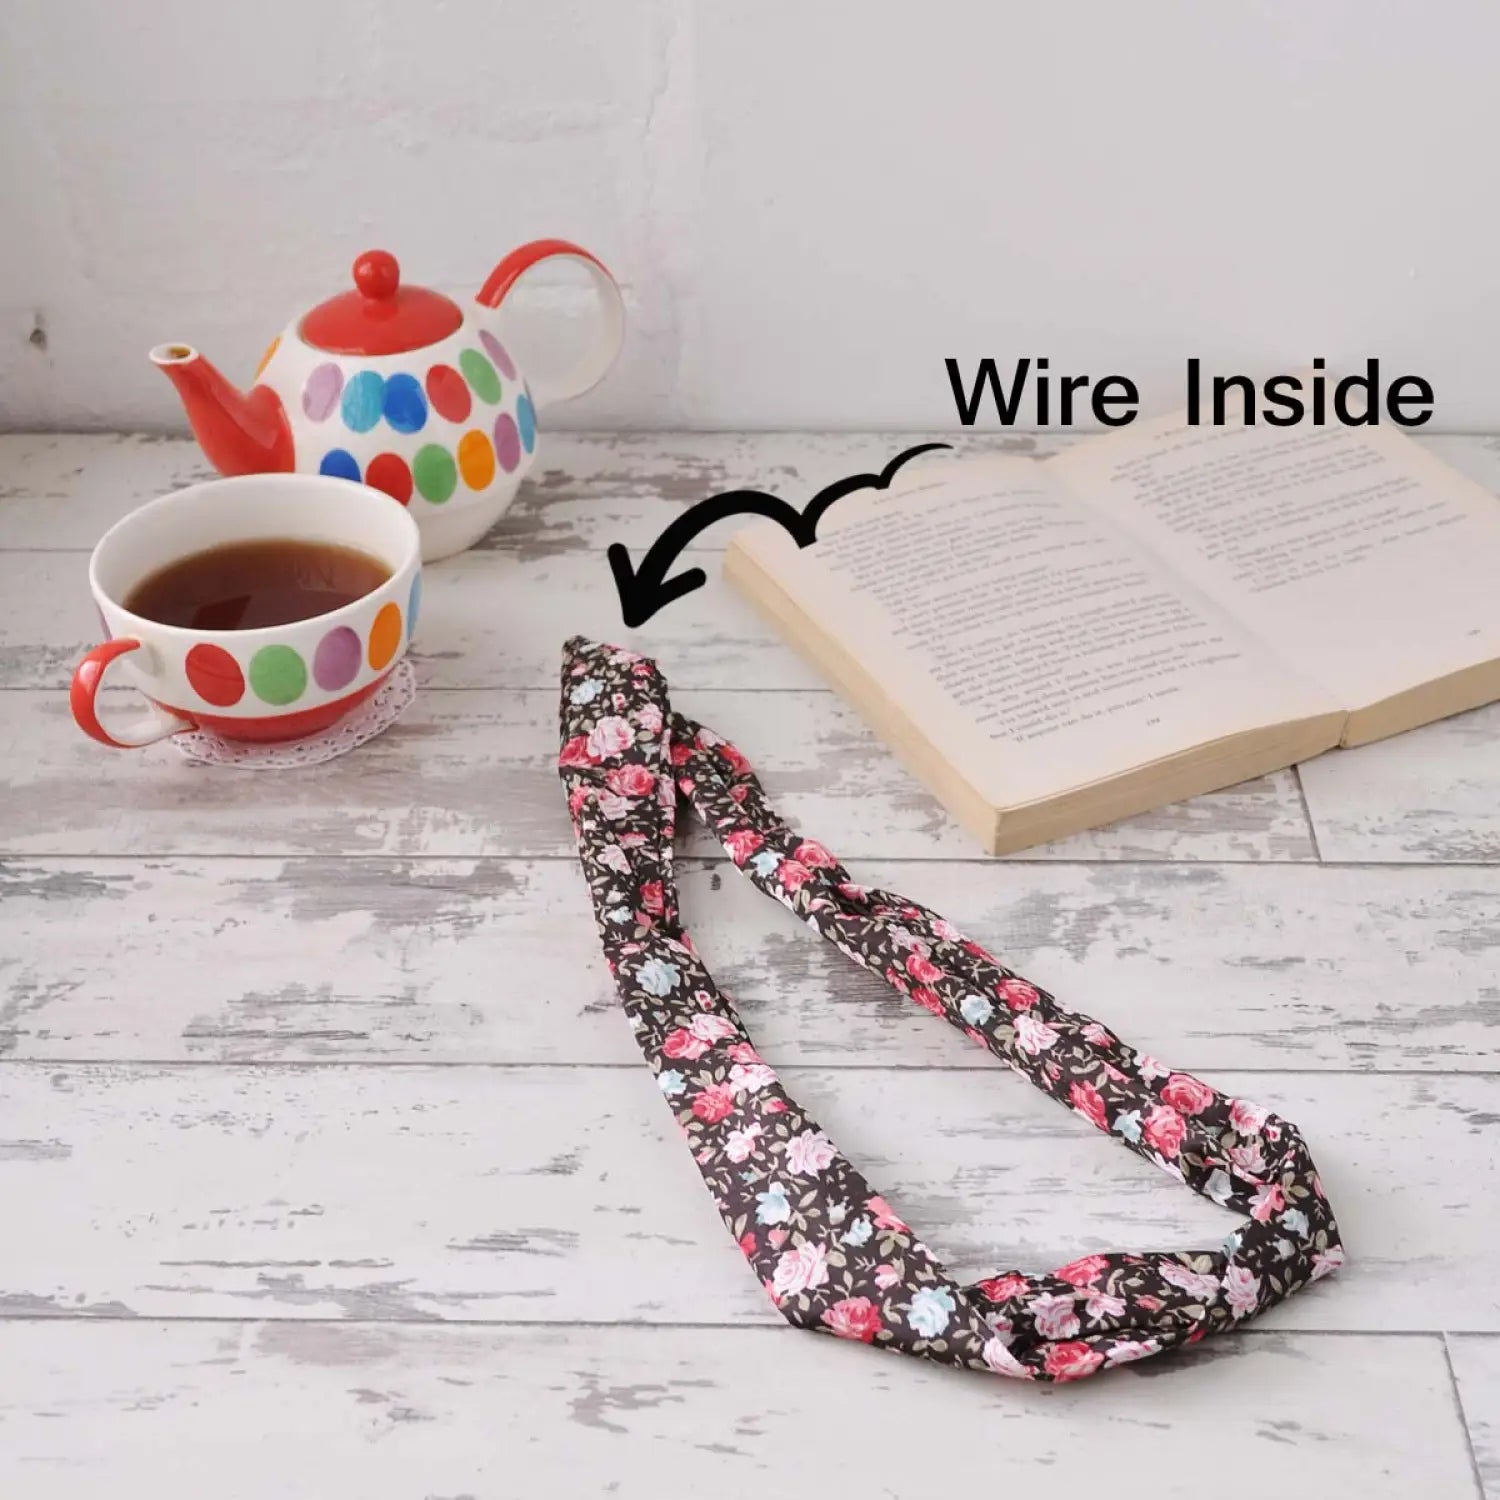 Bunny Ears Retro Rose Print Wire Headband set with book and cup on table